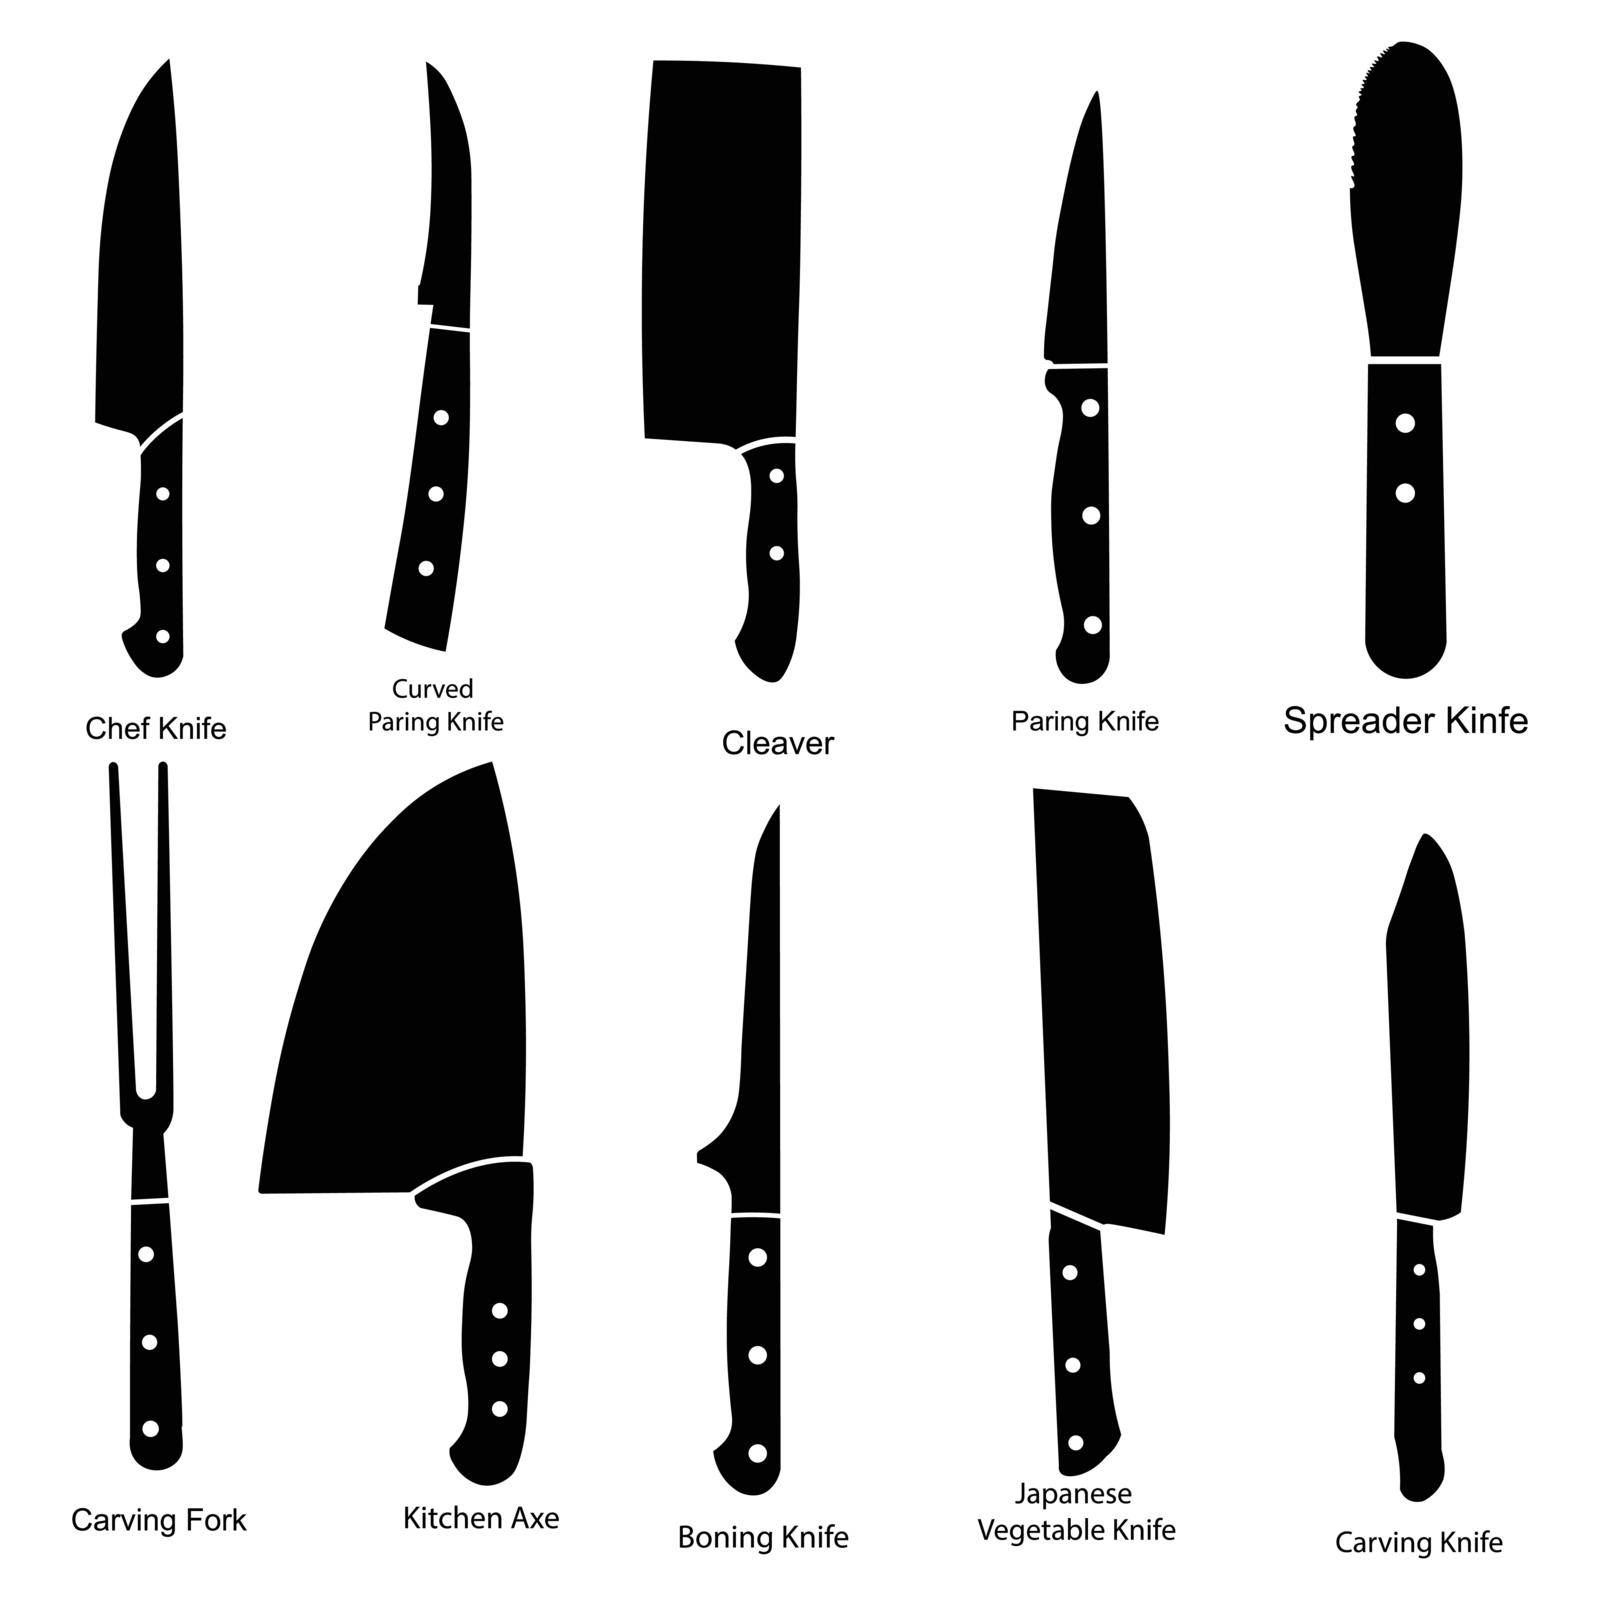 A set of kitchen knives pictogram icons. Chef knife, curved paring, cleaver, paring knife, spreader, carving fork, kitchen axe, boning, japanese vegetable, carving knife isolated on a white background. EPS Vector